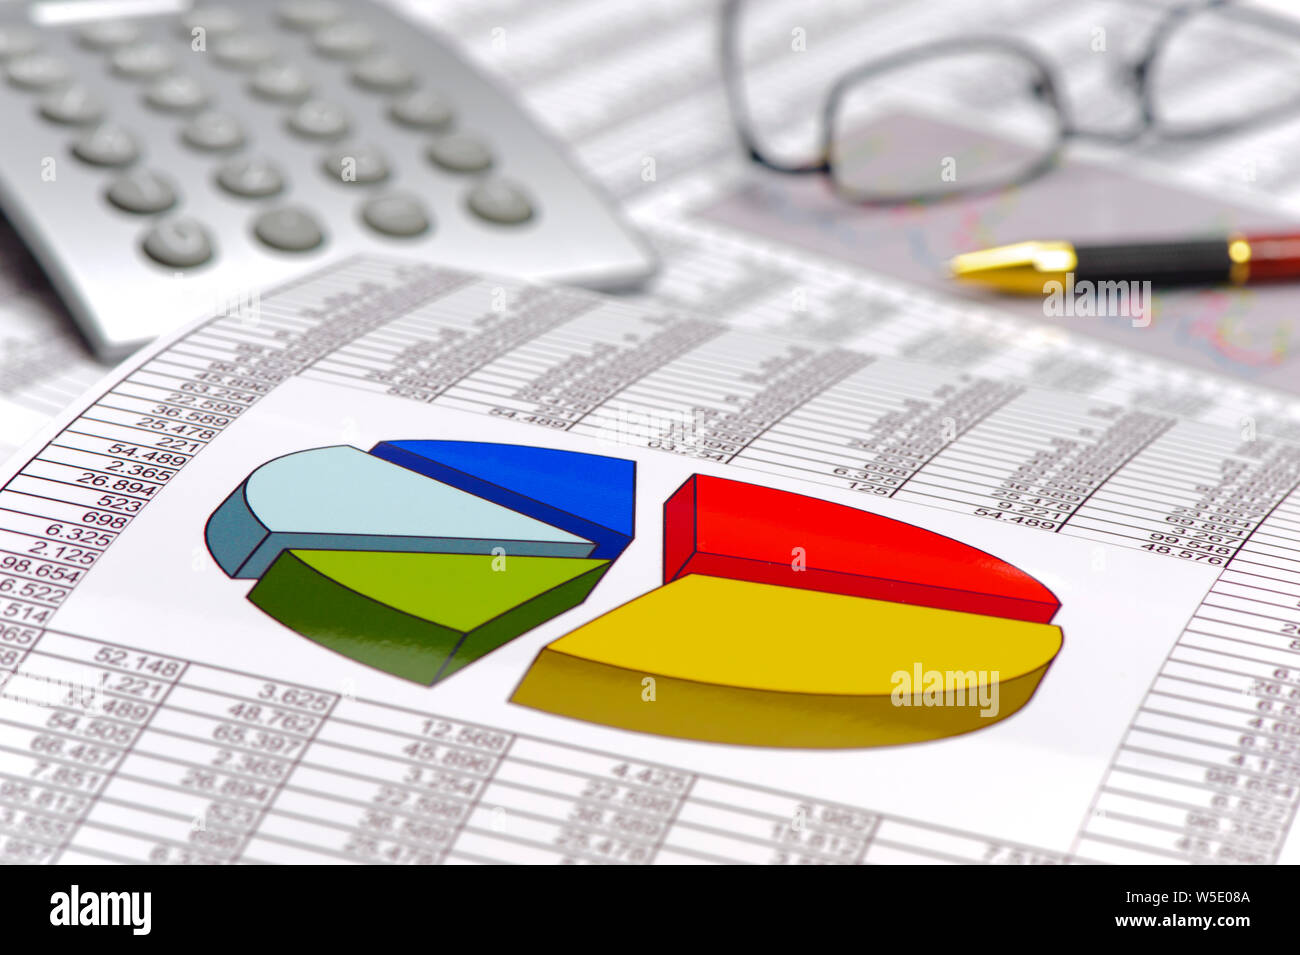 finance and business with chart and calculation Stock Photo